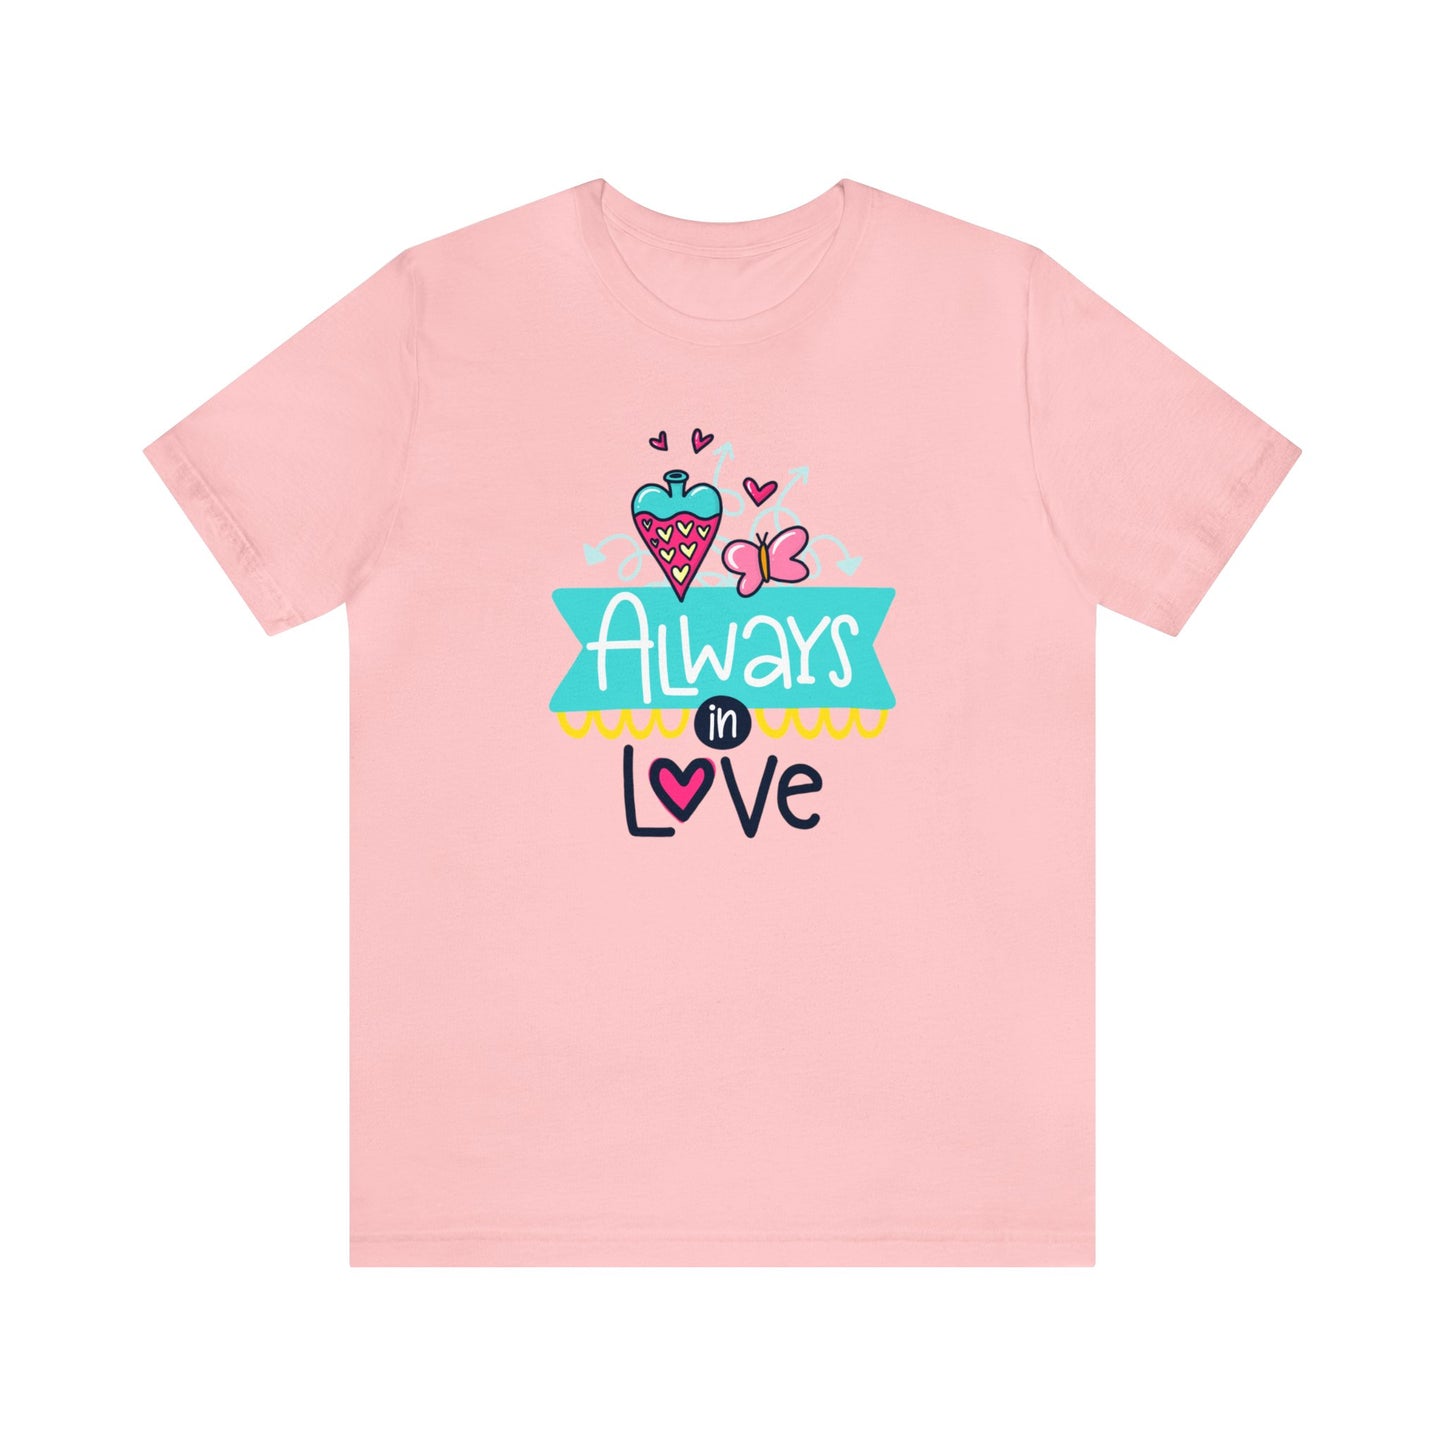 Always In Love: Express Your Passion with Our Stylish T-Shirts!